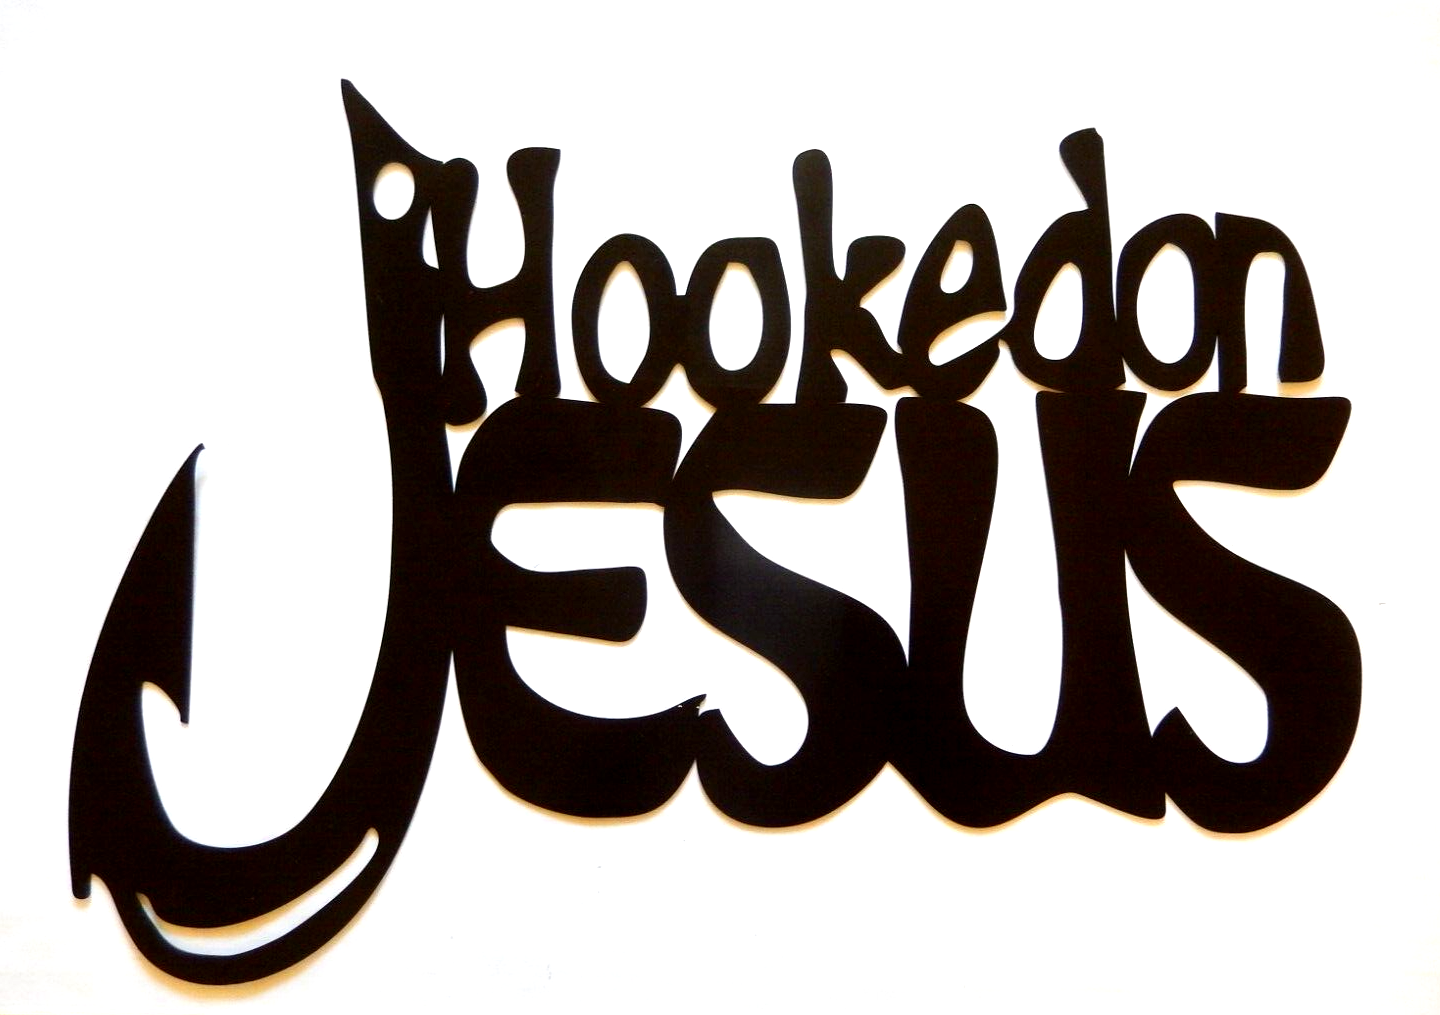 ~NEW~ EXTRA LARGE 14ga. - "HOOKED ON JESUS"   Wall Metal Sign - 34" x 24"